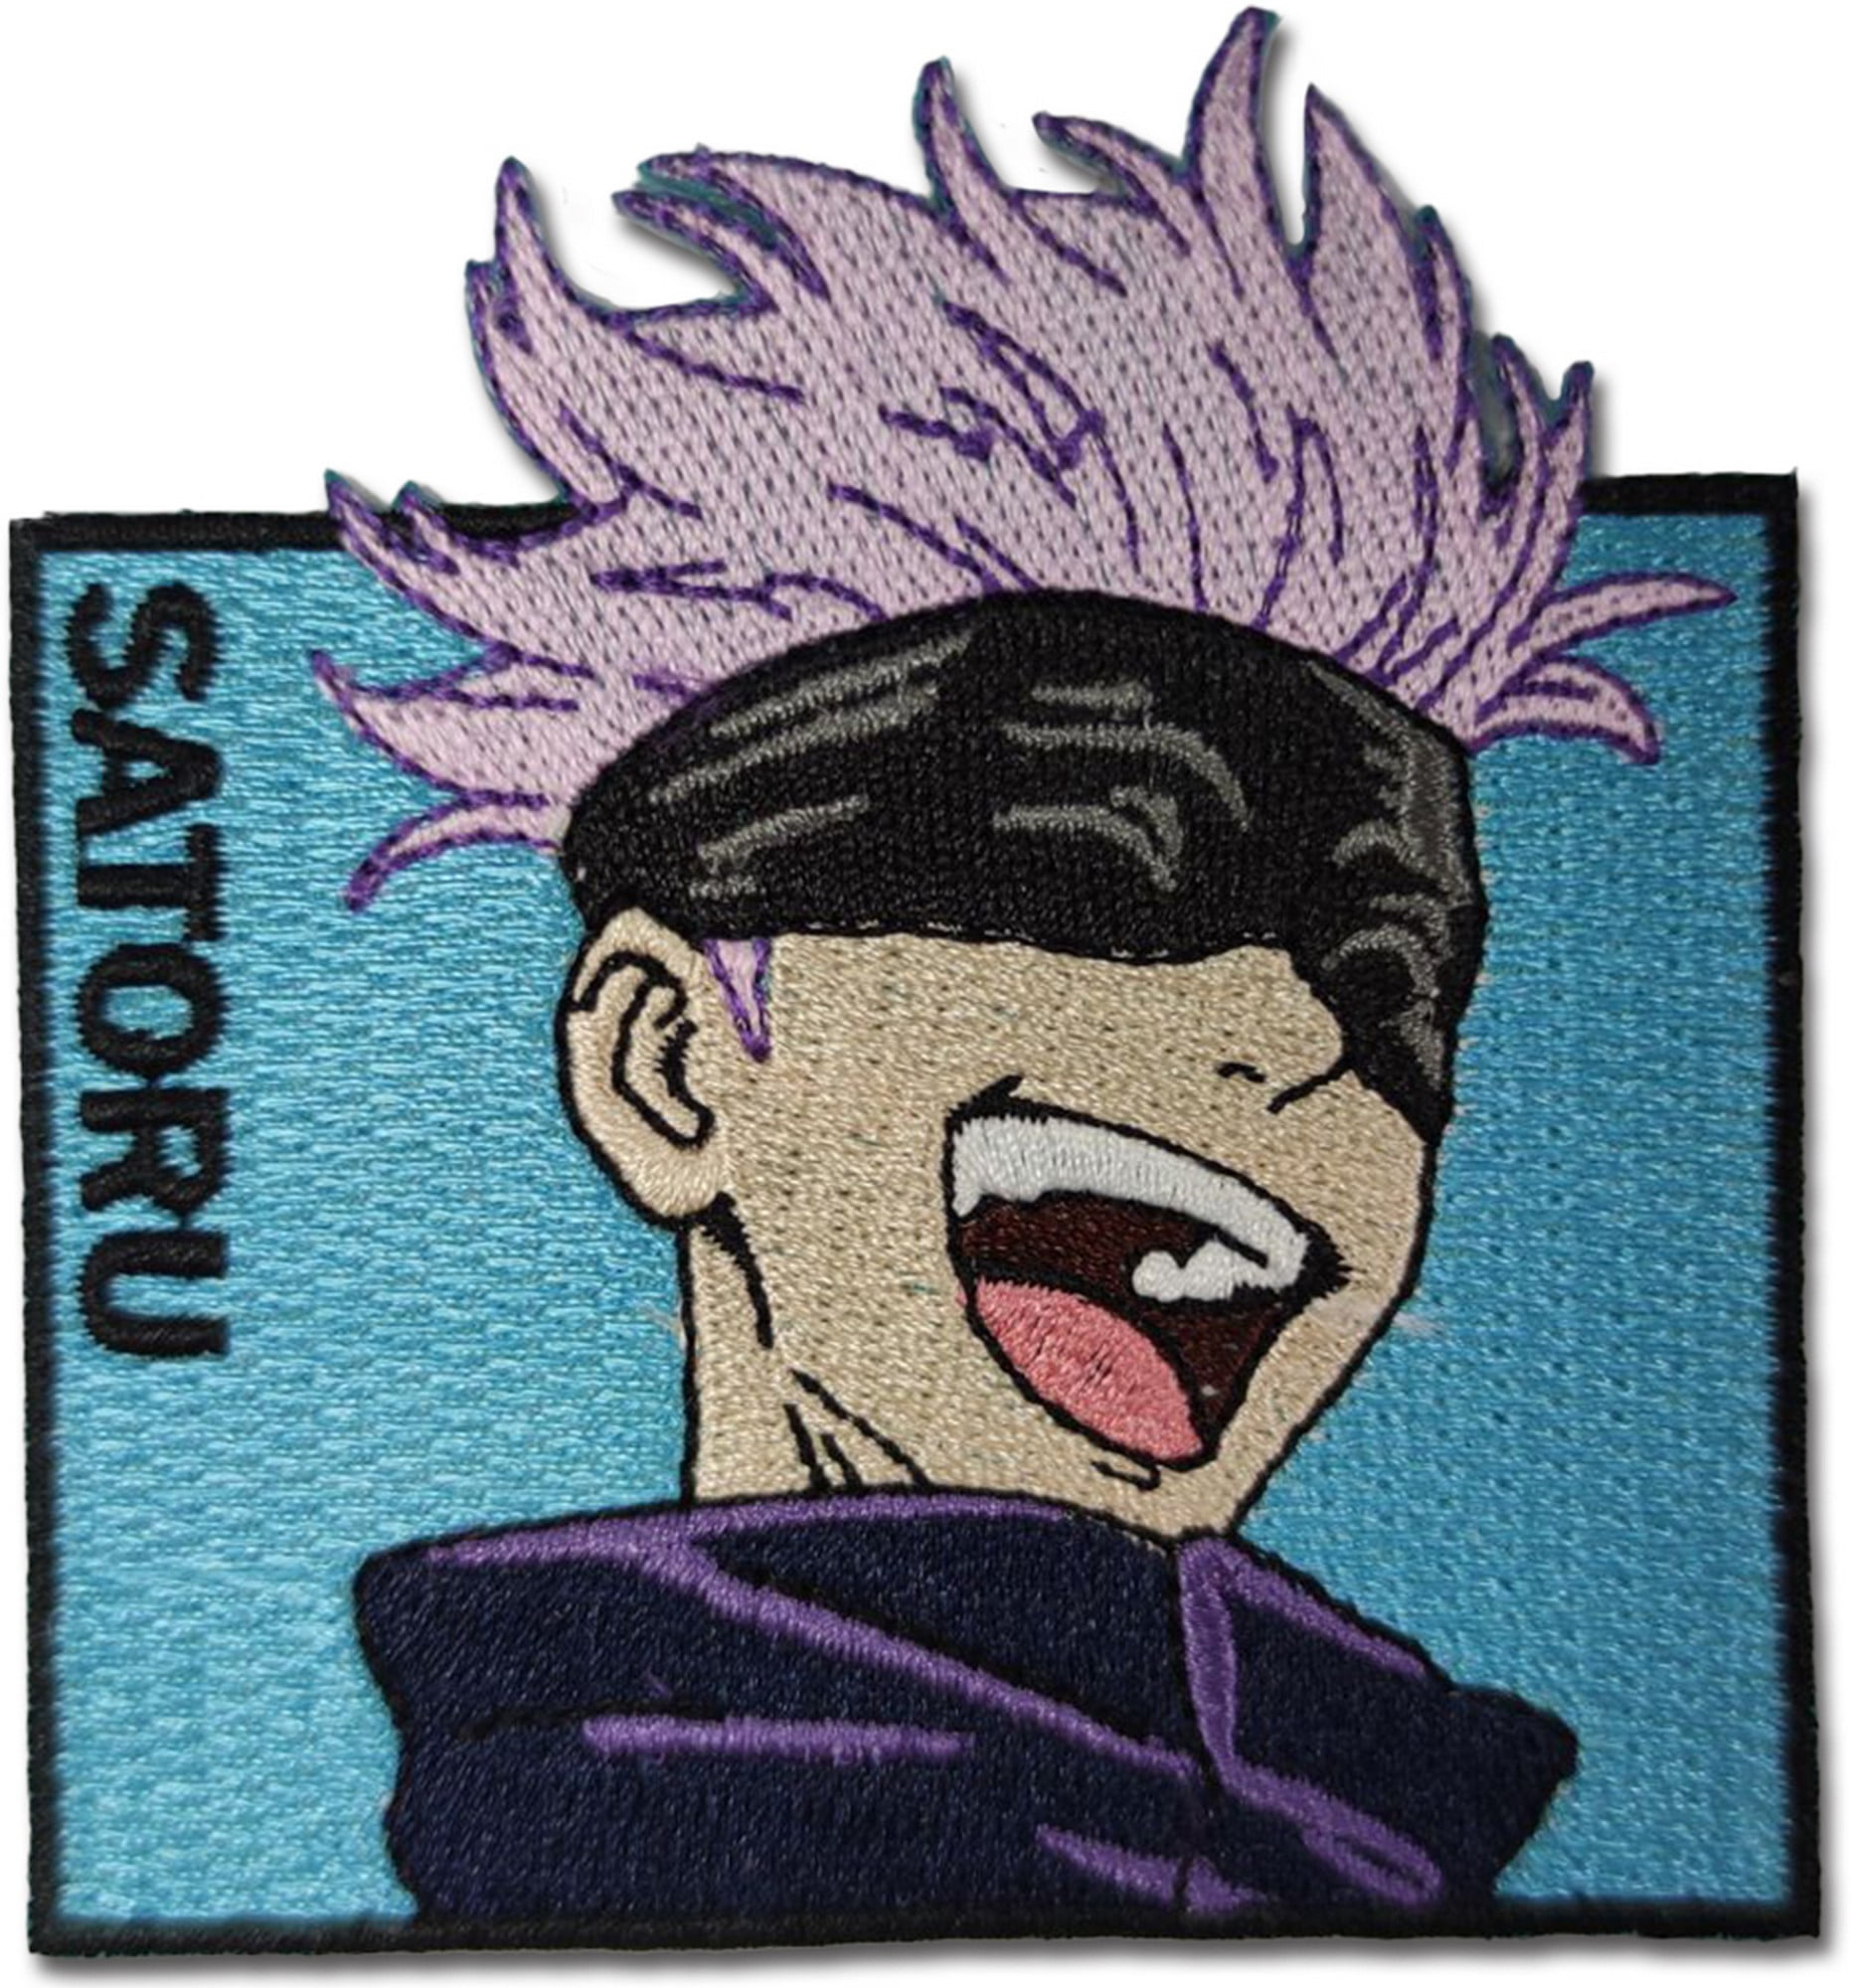 Satoru Gojo Embroidery Patch Anime Iron on Patches For Clothing